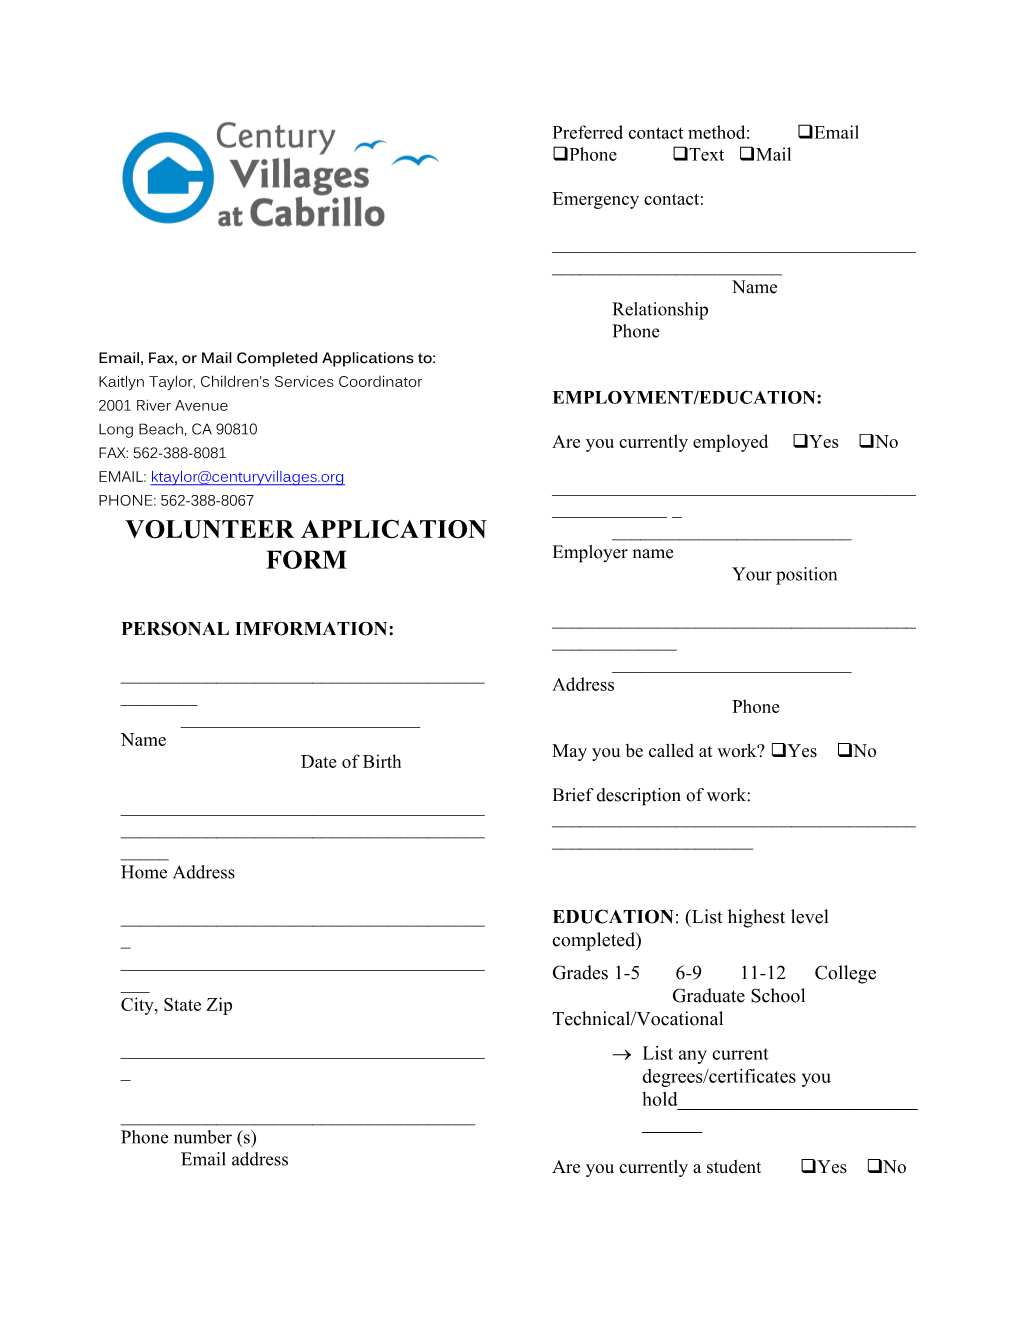 Email, Fax, Or Mail Completed Applications To